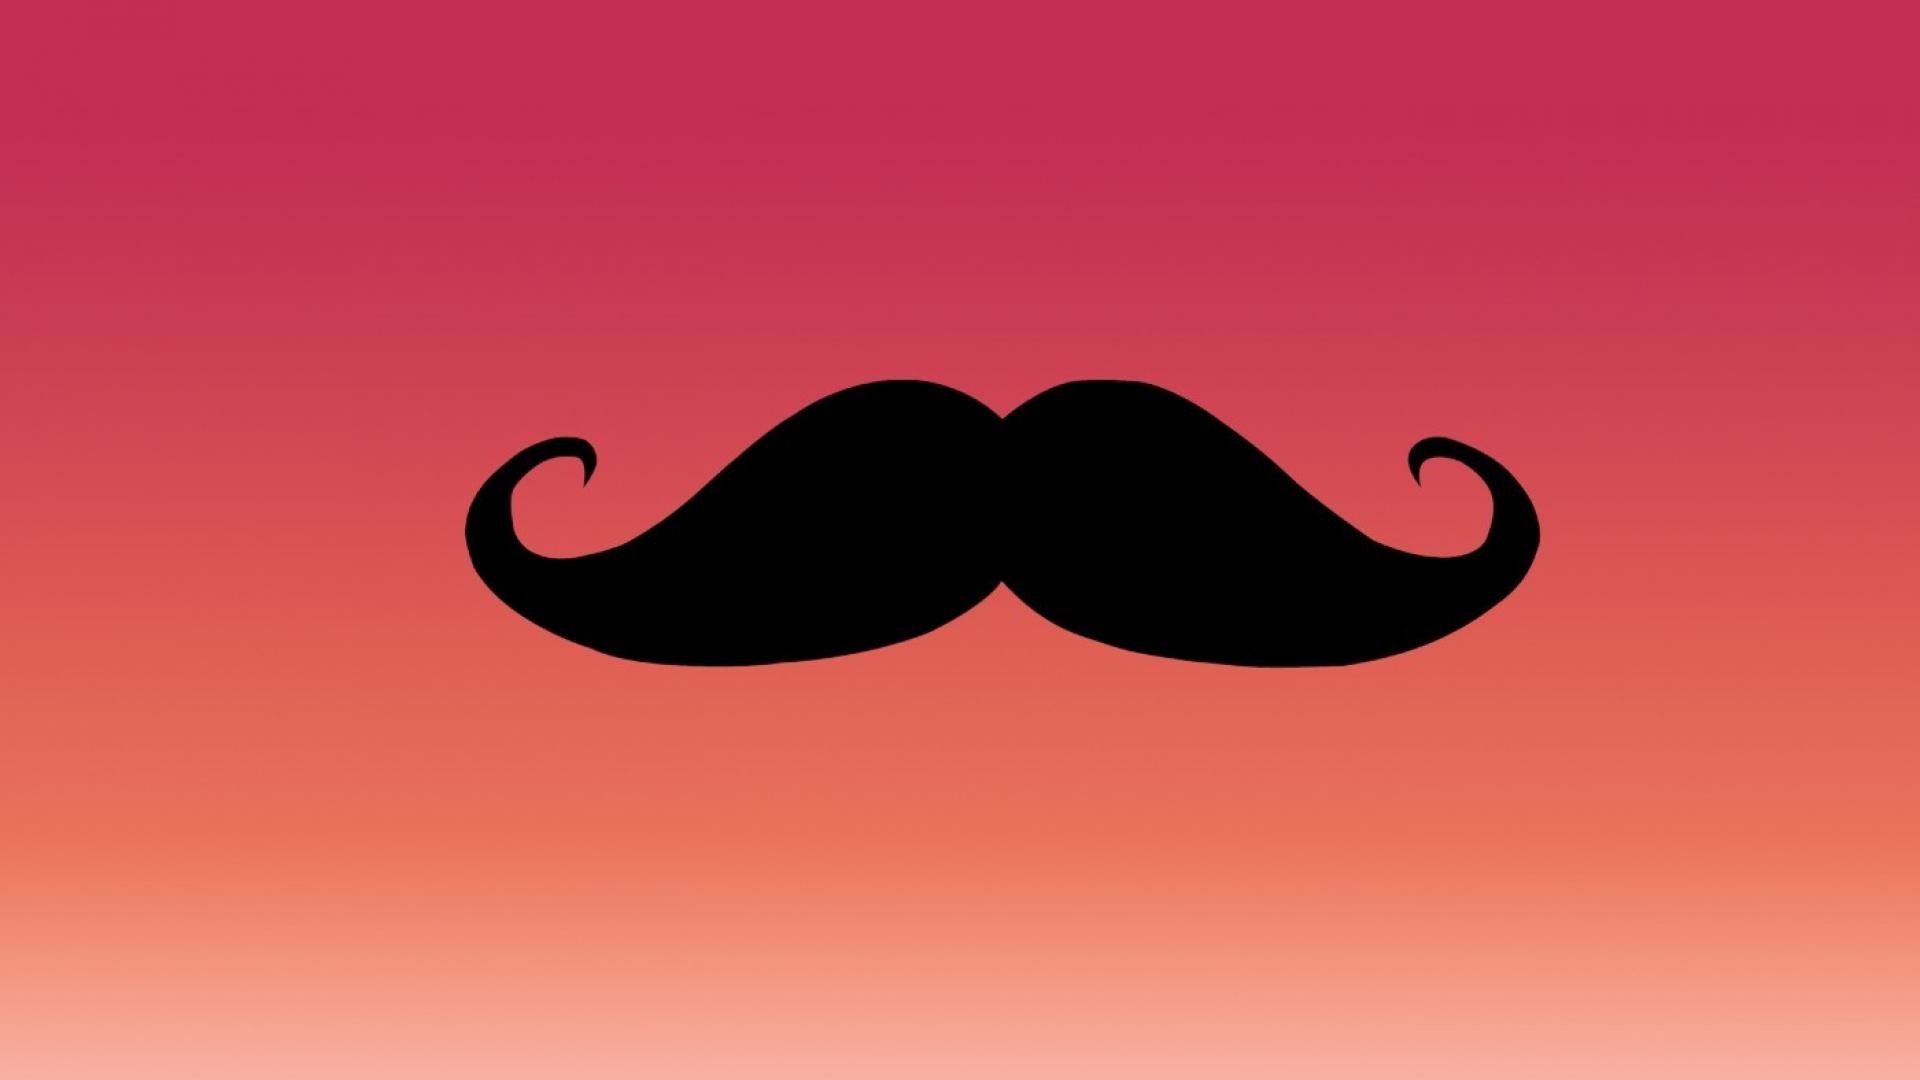 1920x1080 Mustache Wallpapers HD - Page 2 of 3 - wallpaper.wiki